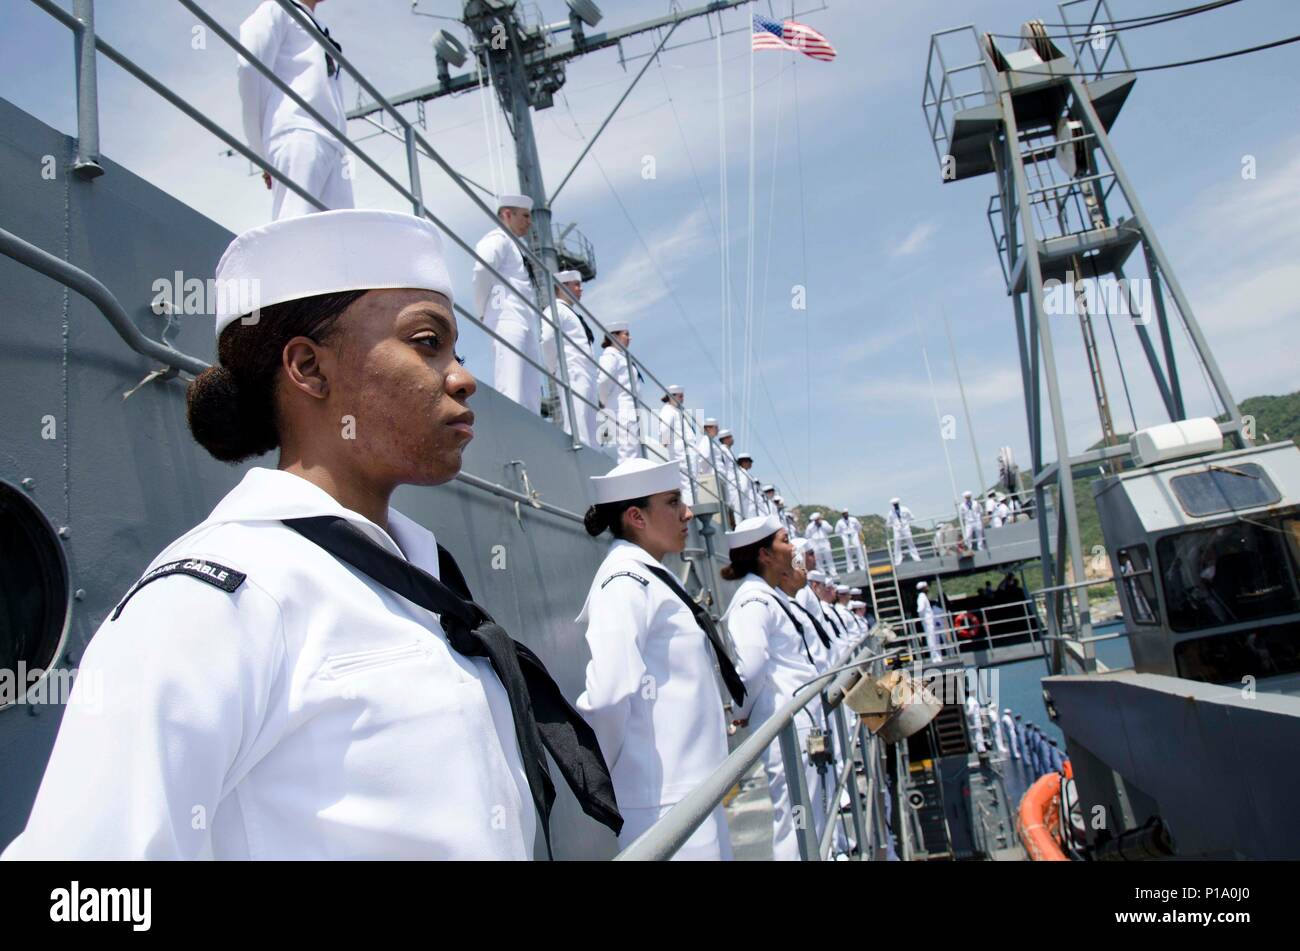 CAM RANH BAY, Vietnam (Oct. 2, 2016)  Petty Officer 3rd Class Michiah D. Naylor, a native of Louisville, Ky., assigned to the submarine tender USS Frank Cable (AS 40), mans the starboard-side rails with her shipmates, while pulling into Cam Ranh Bay, Vietnam, during a Naval Engagement Activity with the people of Vietnam, Oct. 2. In it's seventh year, NEA Vietnam is designed to foster mutual understanding, build confidence in the maritime domain and strengthen relationships between the U.S. Navy and Vietnam People's Navy and the local community. Frank Cable is one of two forward-deployed submar Stock Photo